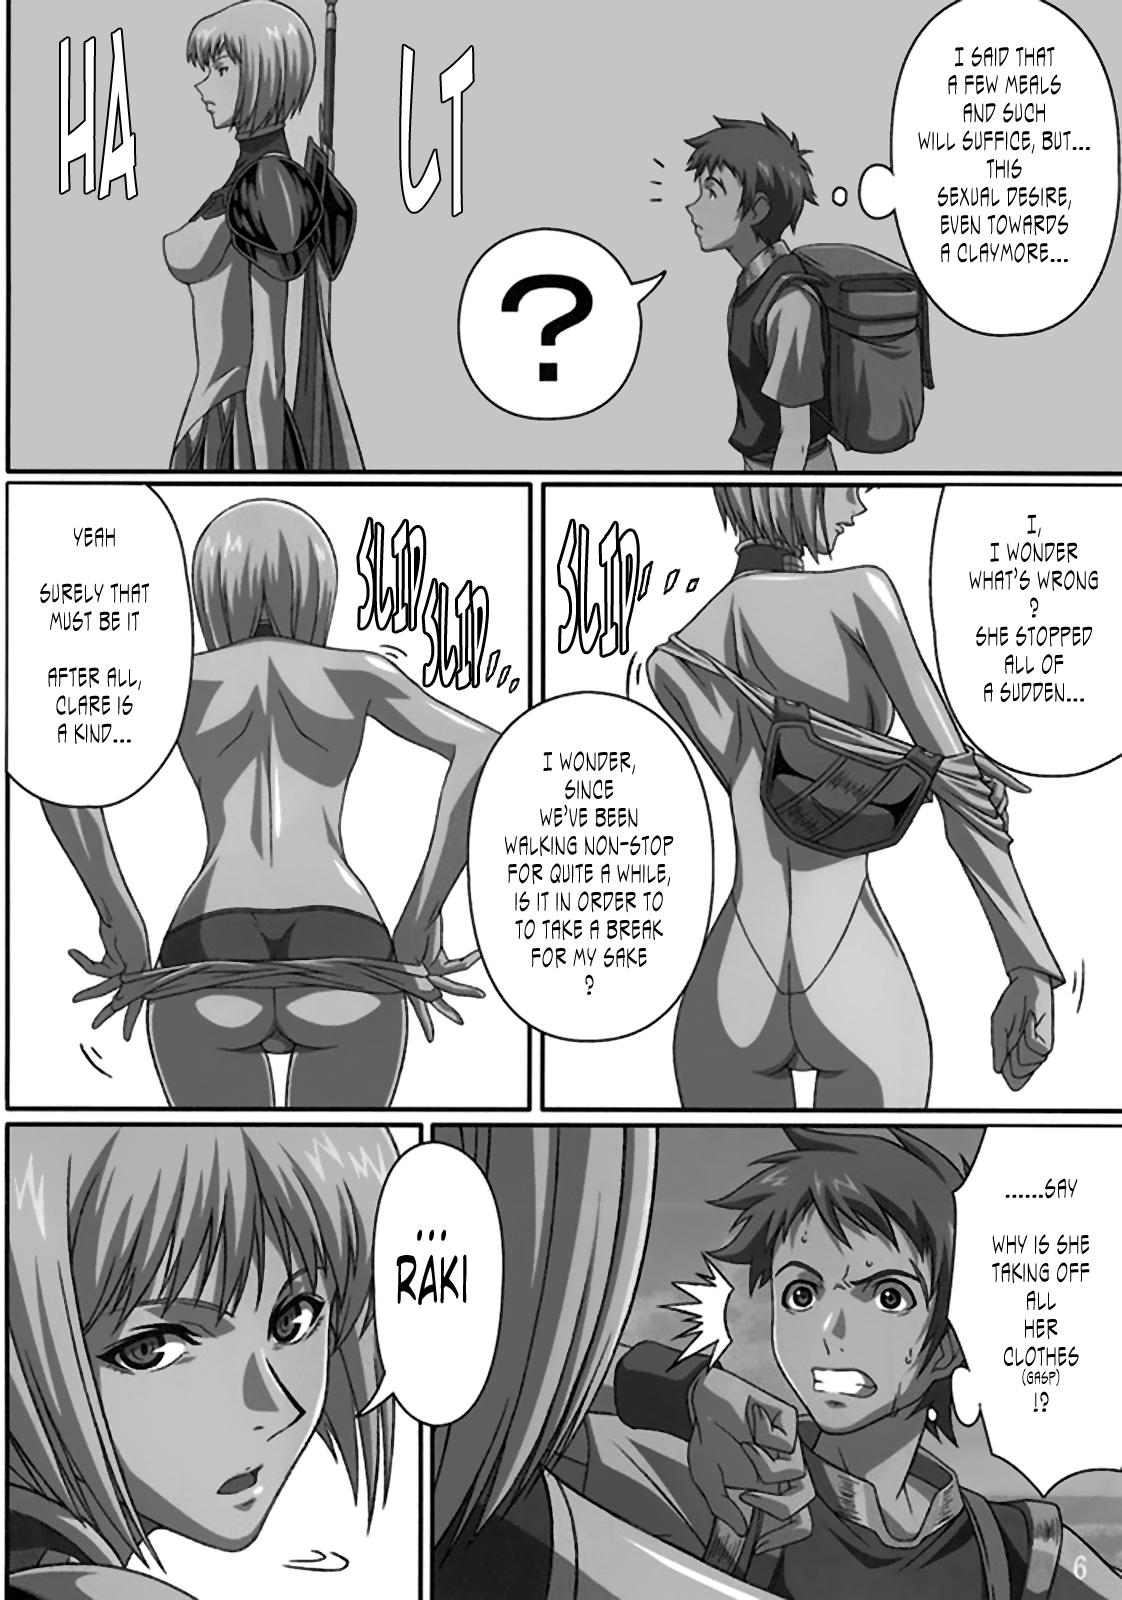 Gays Industrial - Claymore Dick Suck - Page 5